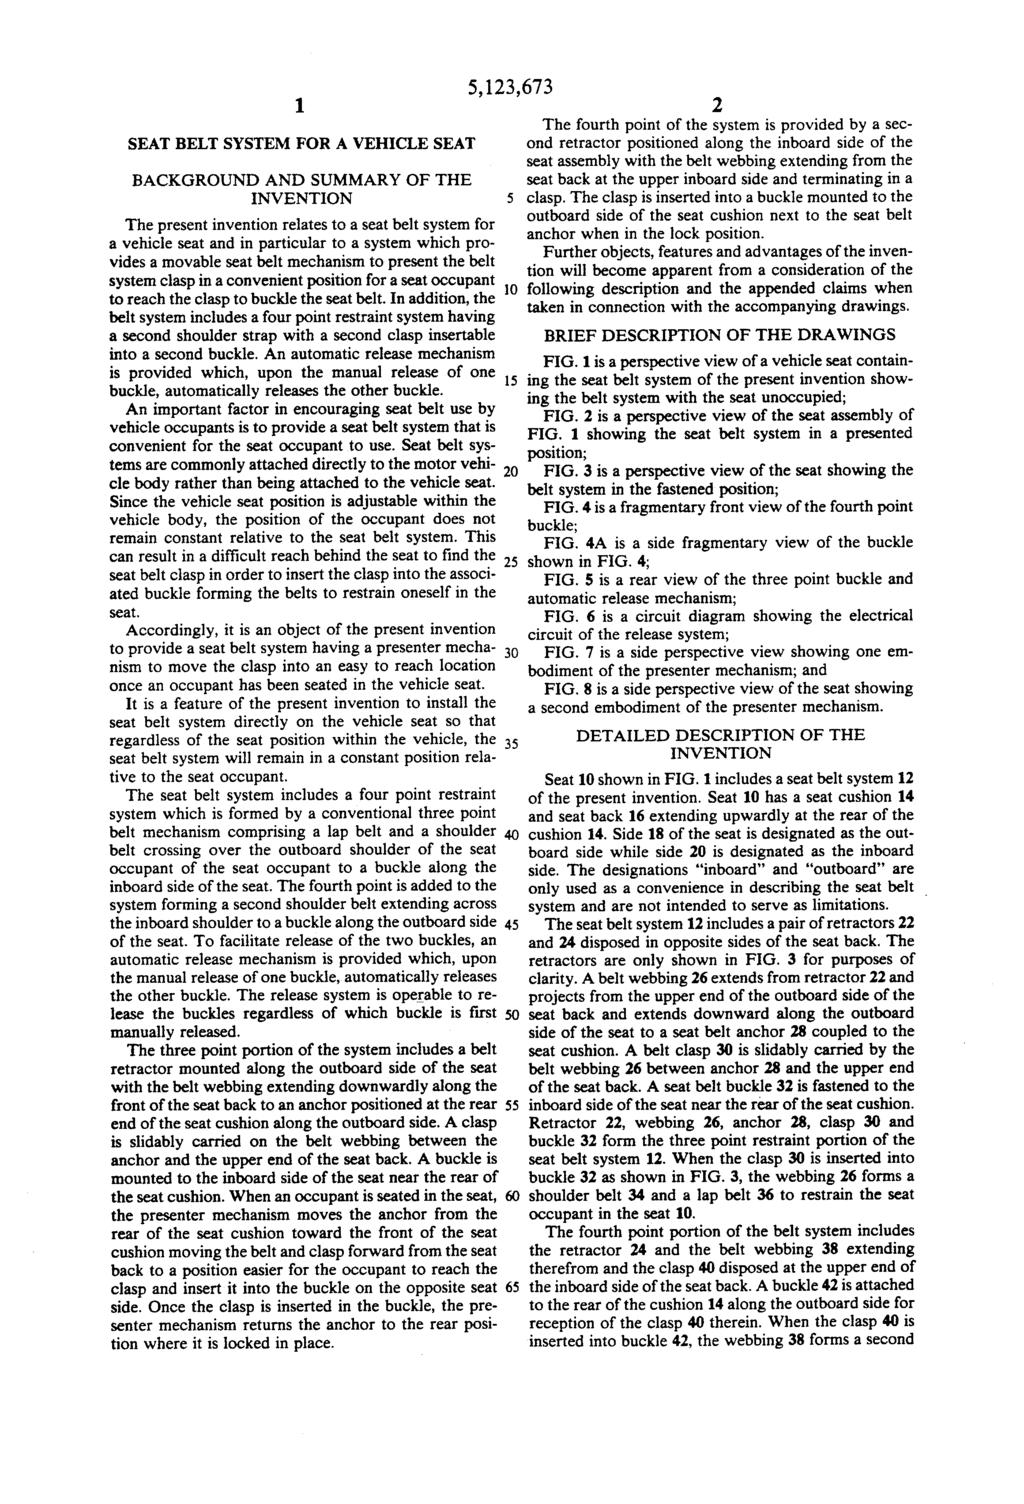 1. SEAT BELT SYSTEM FOR A VEHICLE SEAT BACKGROUND AND SUMMARY OF THE INVENTION The present invention relates to a seatbelt system for a vehicle seat and in particular to a system which pro vides a